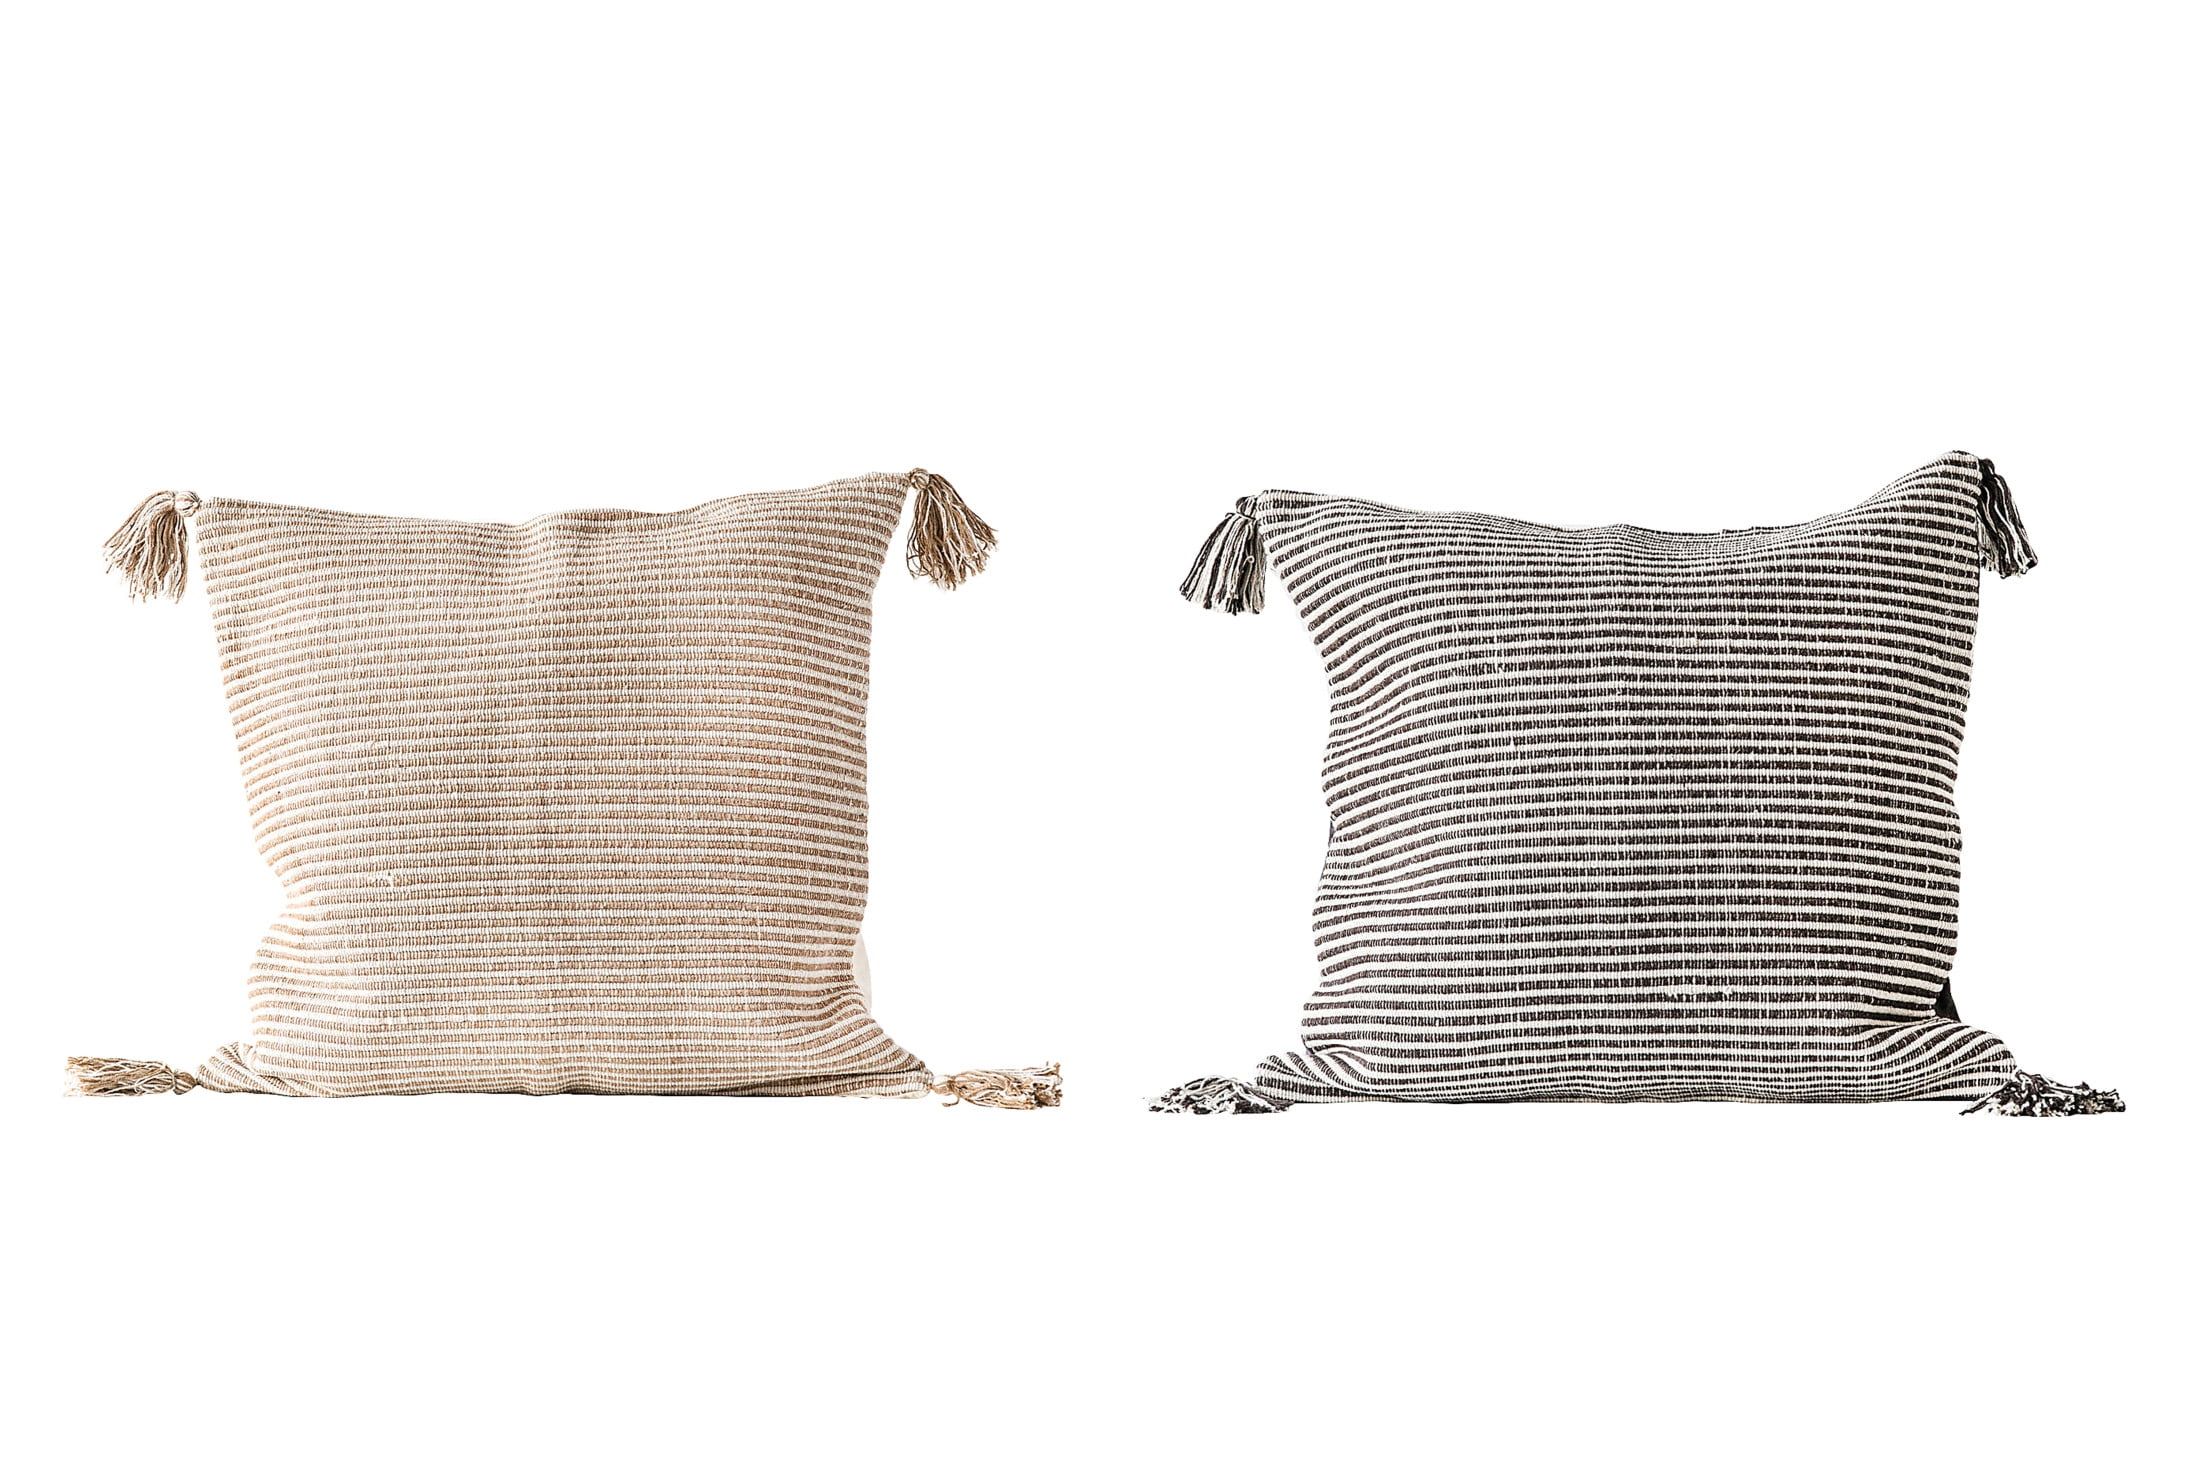 Woven Paths Square Woven Striped Pillows with Tassels, 24" x 4", Set of 2 Pieces | Walmart (US)